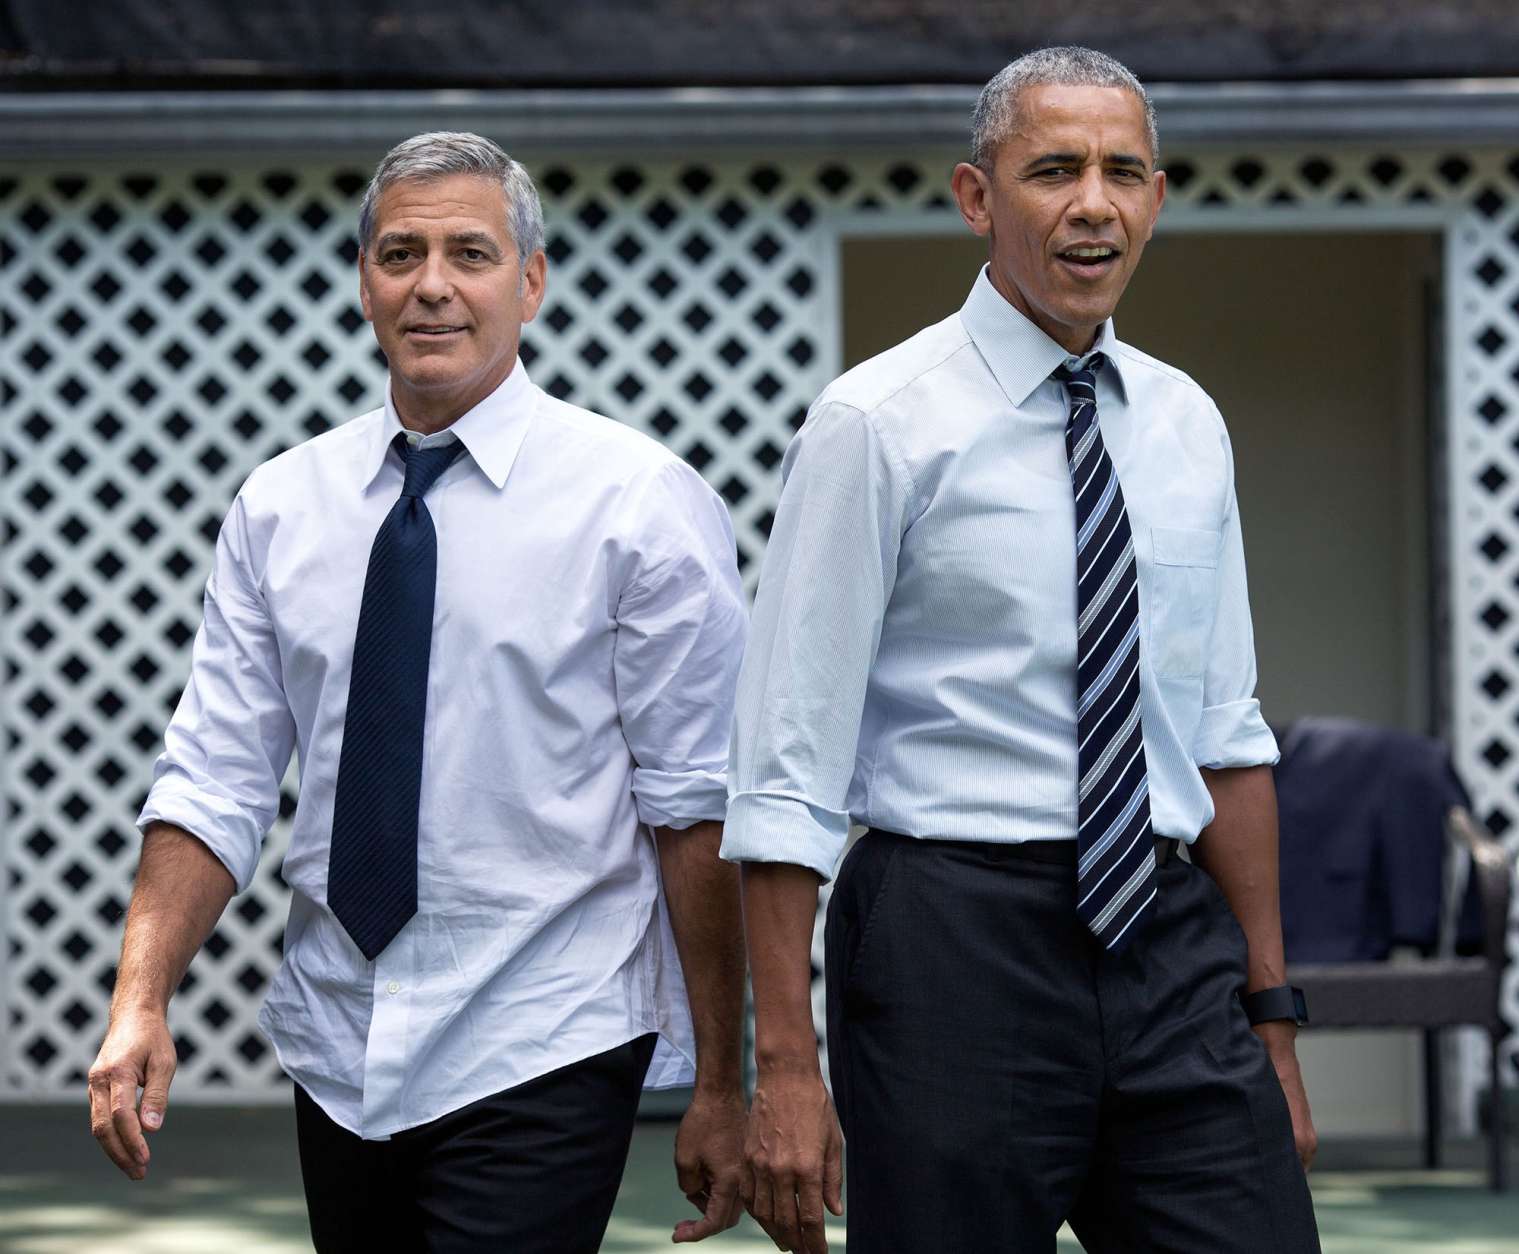 Sept. 12, 2016
“After a meeting with actor and human rights activist George Clooney, the President invited him and three of his colleagues to shoot hoops on the White House basketball court. This photo garnered a lot of attention when it was hung on the walls of the West Wing.” (Official White House Photo by Pete Souza)